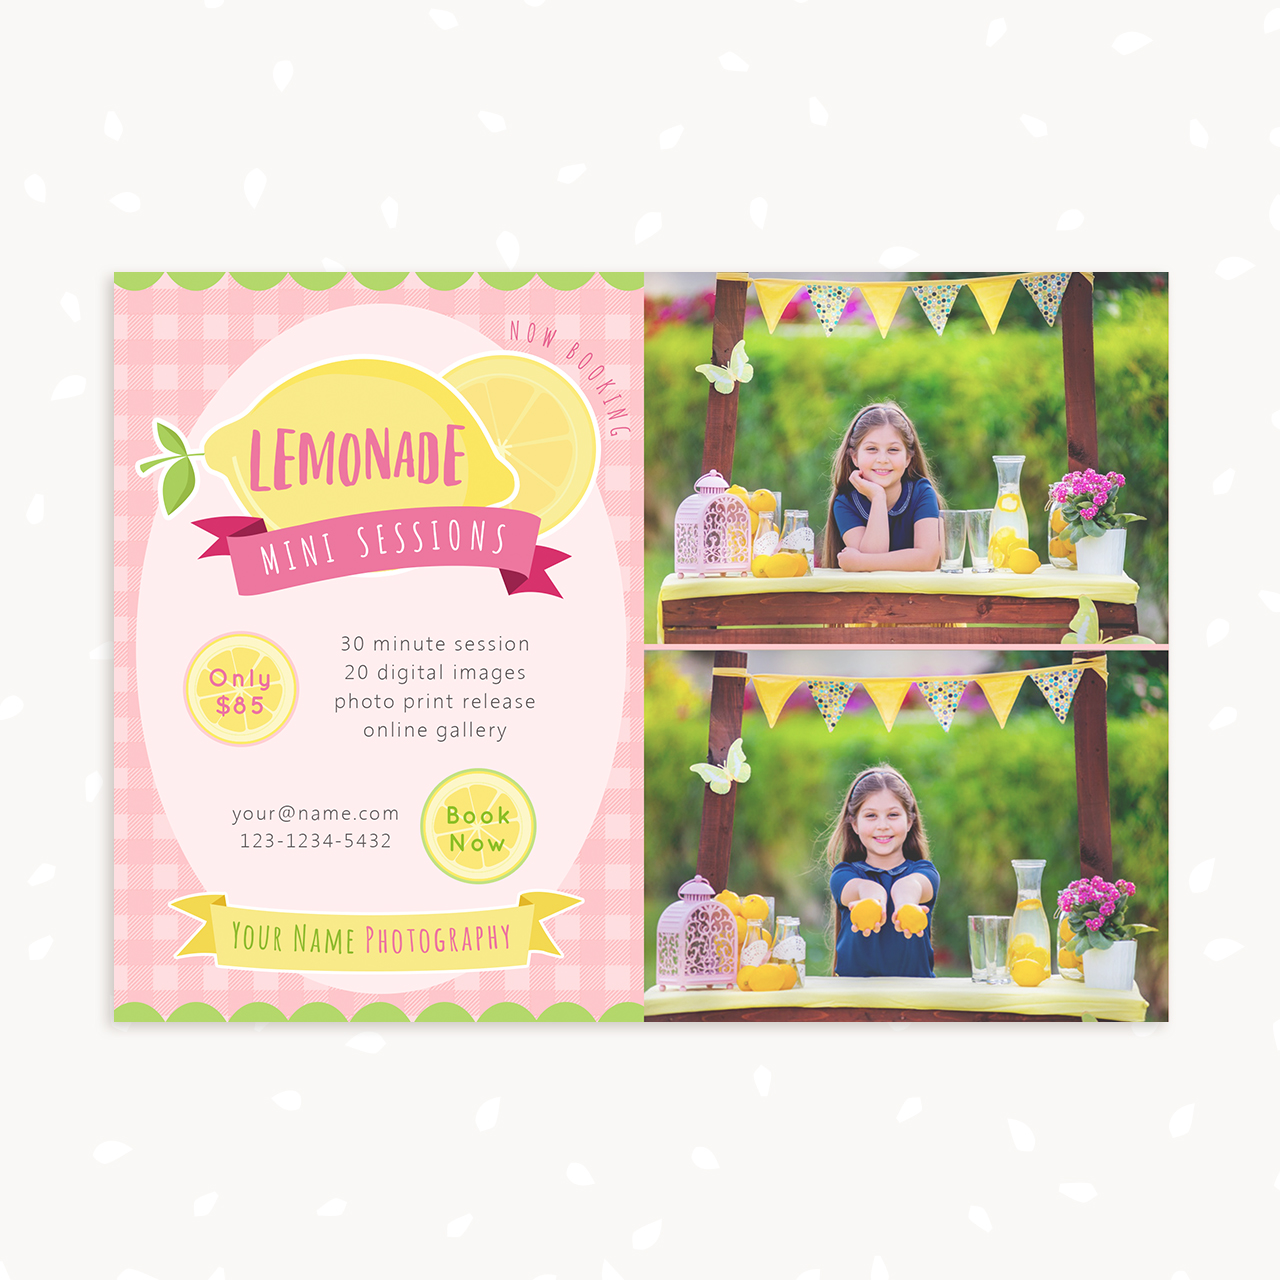 MA250 INSTANT DOWNLOAD Lemonade Stand Mini Session template